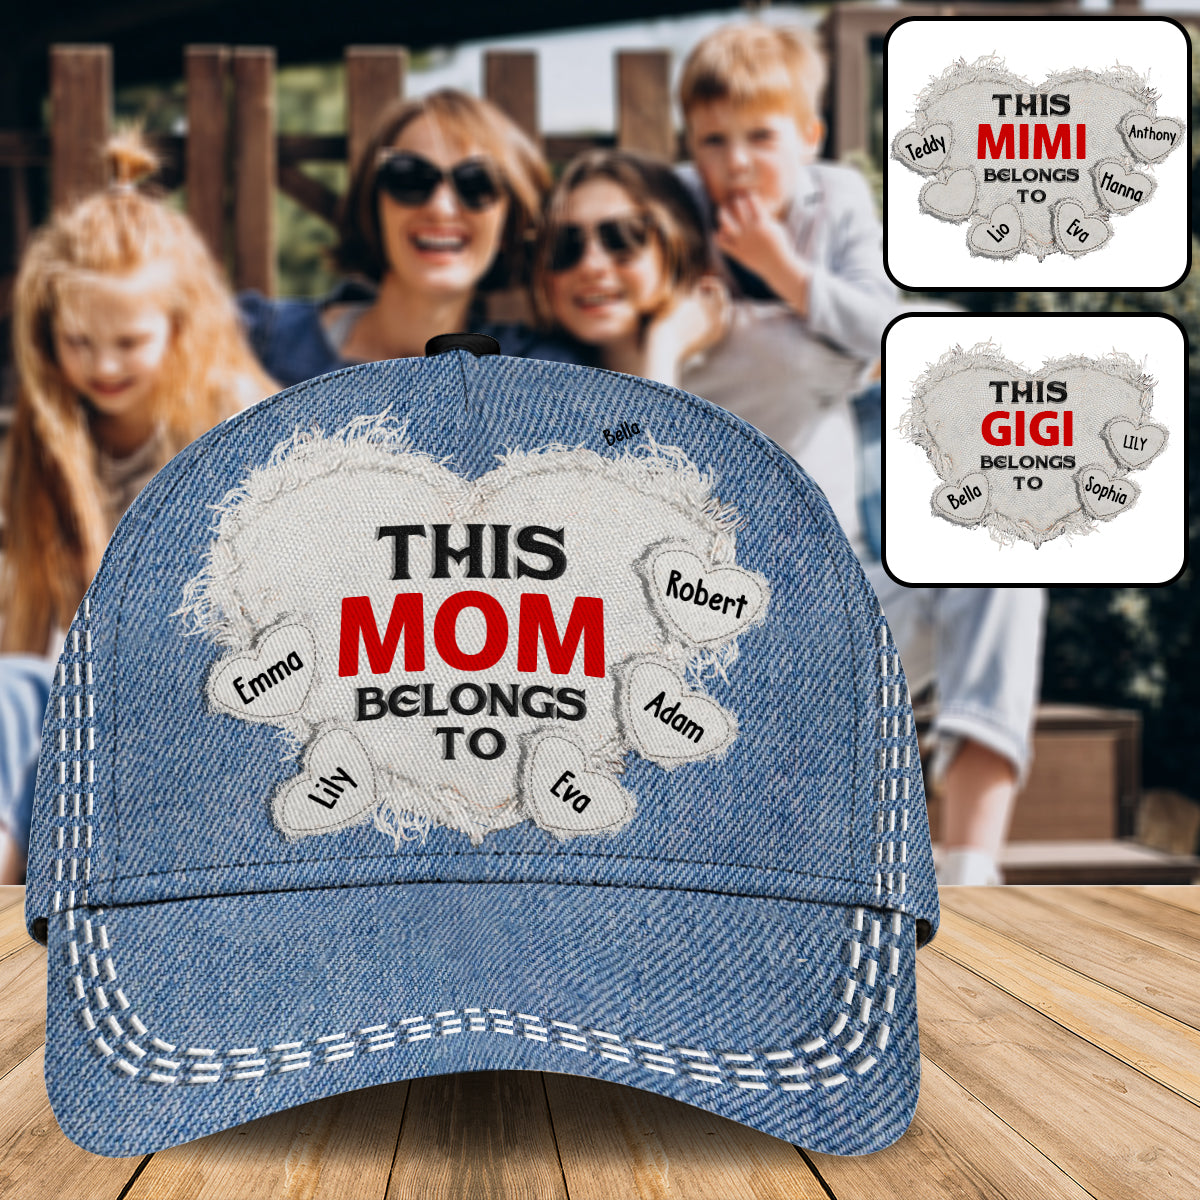 This Mom Belongs To - Personalized Mother Classic Cap